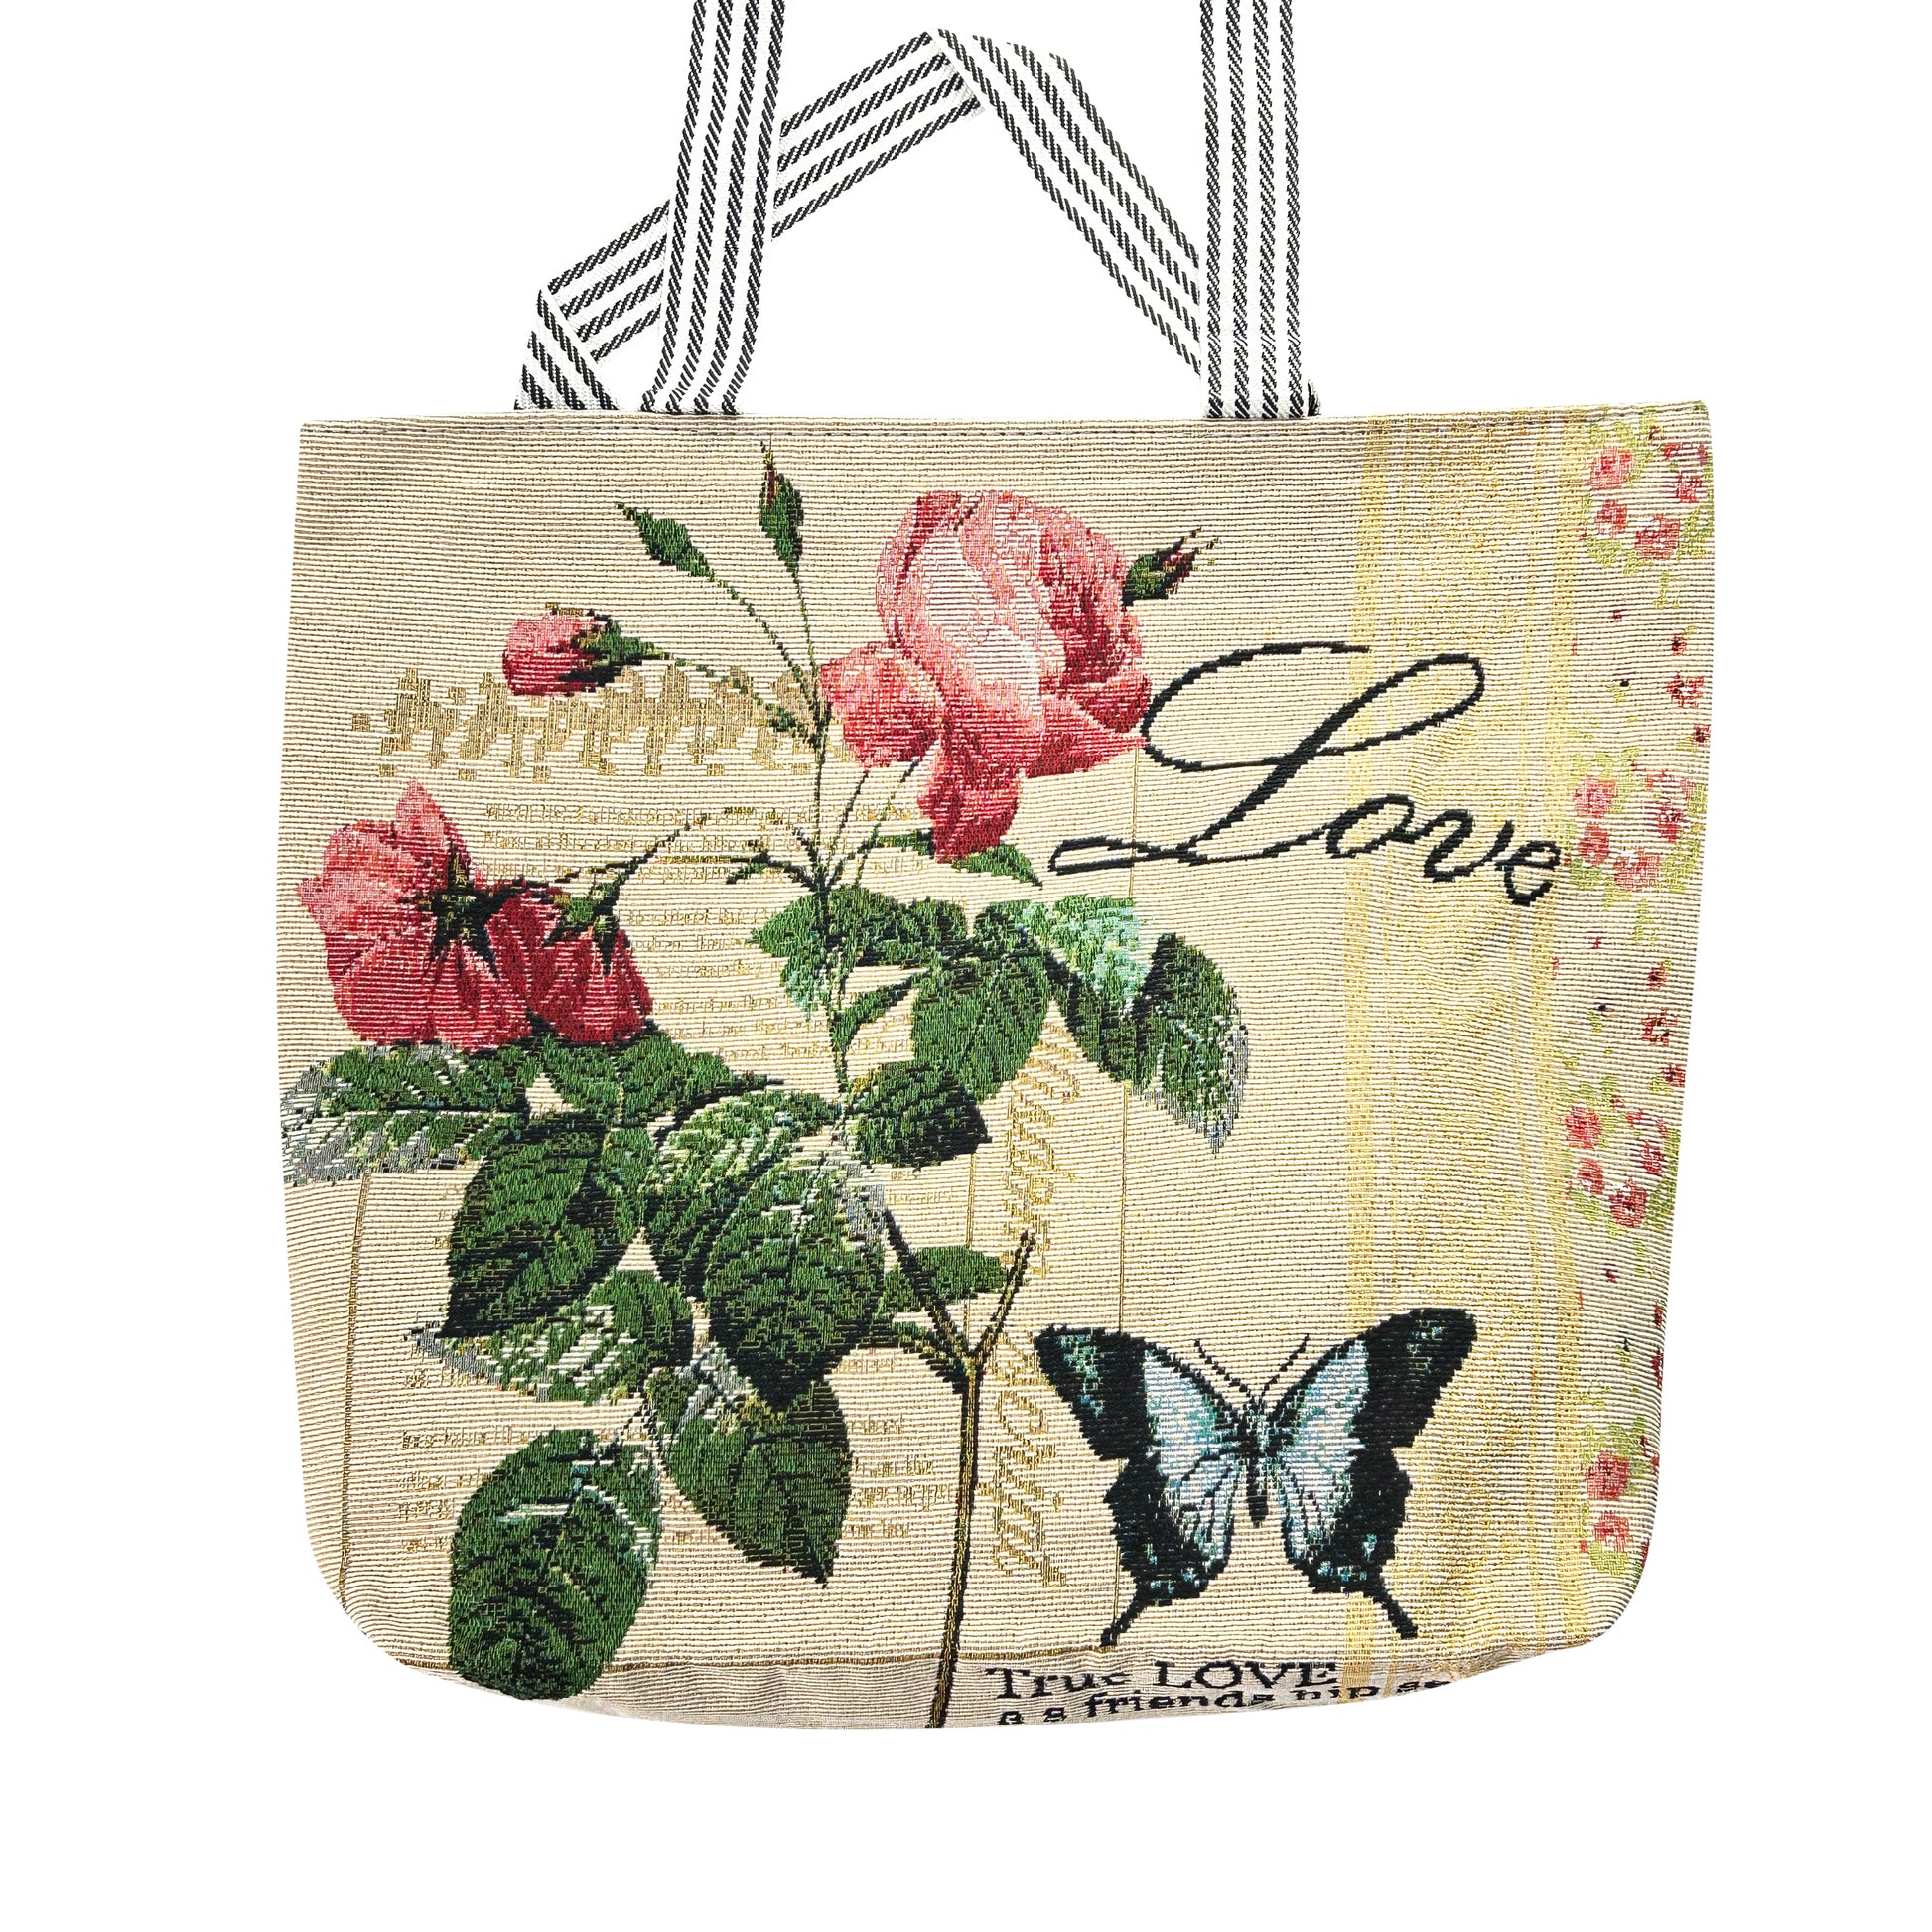 Canvas Tote Bag for Women